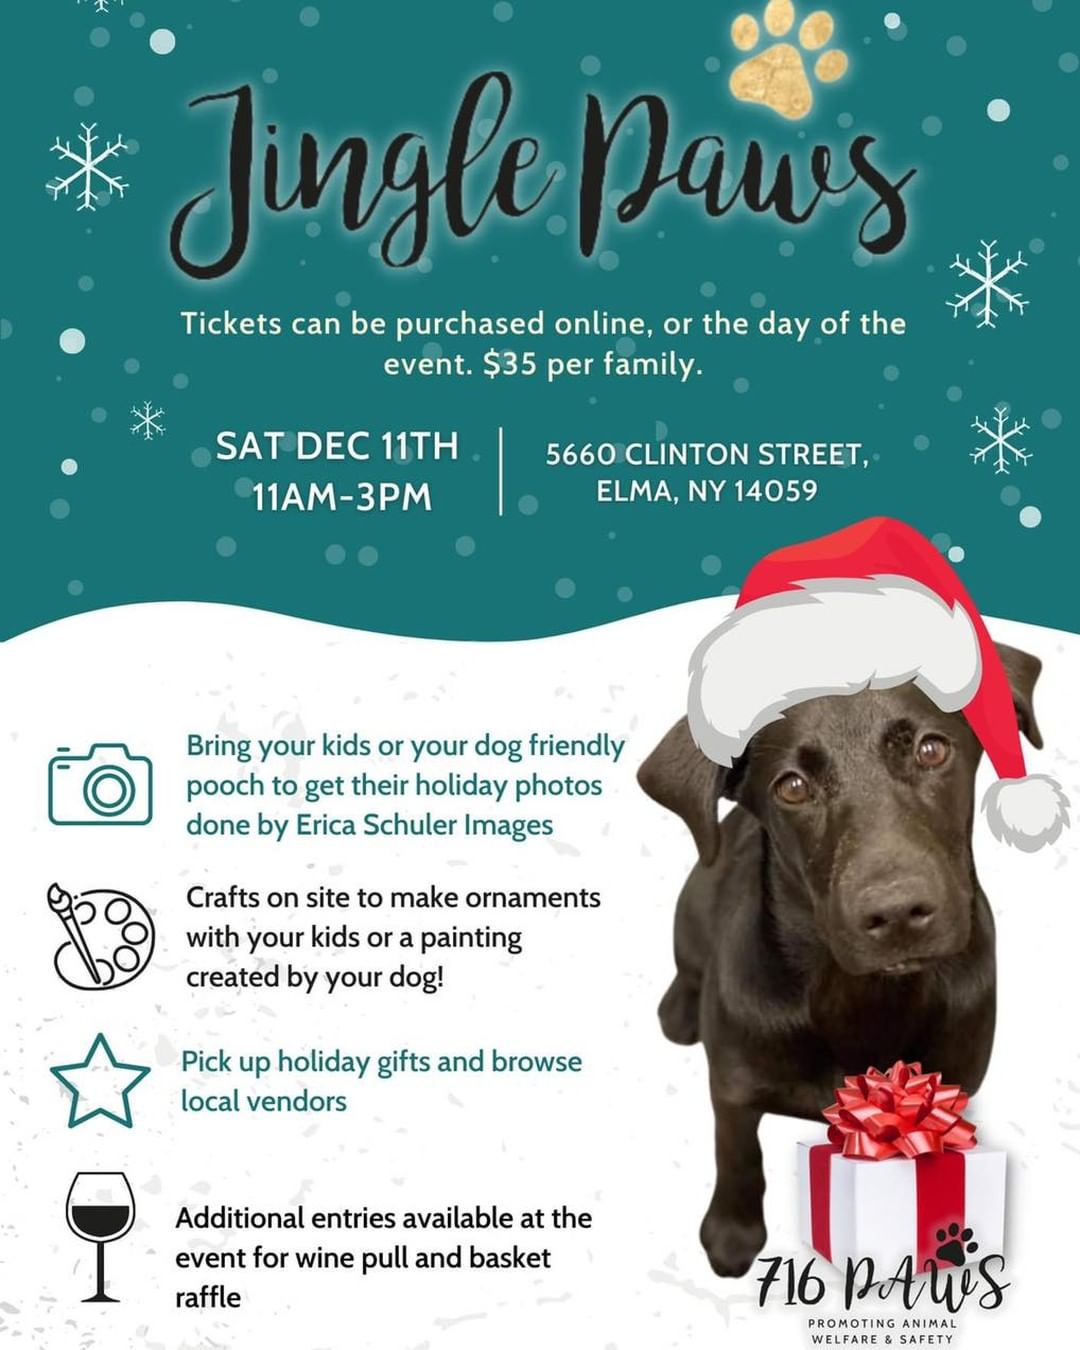 Please join 716 Paws for an afternoon of holiday FUNdraising. 

📸 Bring your kids or your dog friendly pooch to get their holiday photos done by Erica Schuler Images

🎨Crafts on site to make ornaments with your kids or a painting created by your dog! 
⭐️ Pick up holiday gifts and browse local vendors

🍷 Additional entries available at the event for wine pull and basket raffle 

🎟Tickets can be purchased online or the day of the event. 
🐾 $35 per family 

💎Once purchased, guests will be entered into the wine pull and basket raffle. In addition, you will receive 2 digital downloads of holiday themed photos plus a goodie bag! 

✨Guests do not have to be present to win a bottle from the wine pull or a basket from the raffle. Winners can pick up prizes at the office.

Tickets can be purchased on our website:
https://www.716paws.org/jinglepaws

 <a target='_blank' href='https://www.instagram.com/explore/tags/fundraising/'>#fundraising</a> <a target='_blank' href='https://www.instagram.com/explore/tags/dog/'>#dog</a> <a target='_blank' href='https://www.instagram.com/explore/tags/doglovers/'>#doglovers</a> <a target='_blank' href='https://www.instagram.com/explore/tags/dogloversonly/'>#dogloversonly</a> <a target='_blank' href='https://www.instagram.com/explore/tags/wine/'>#wine</a>